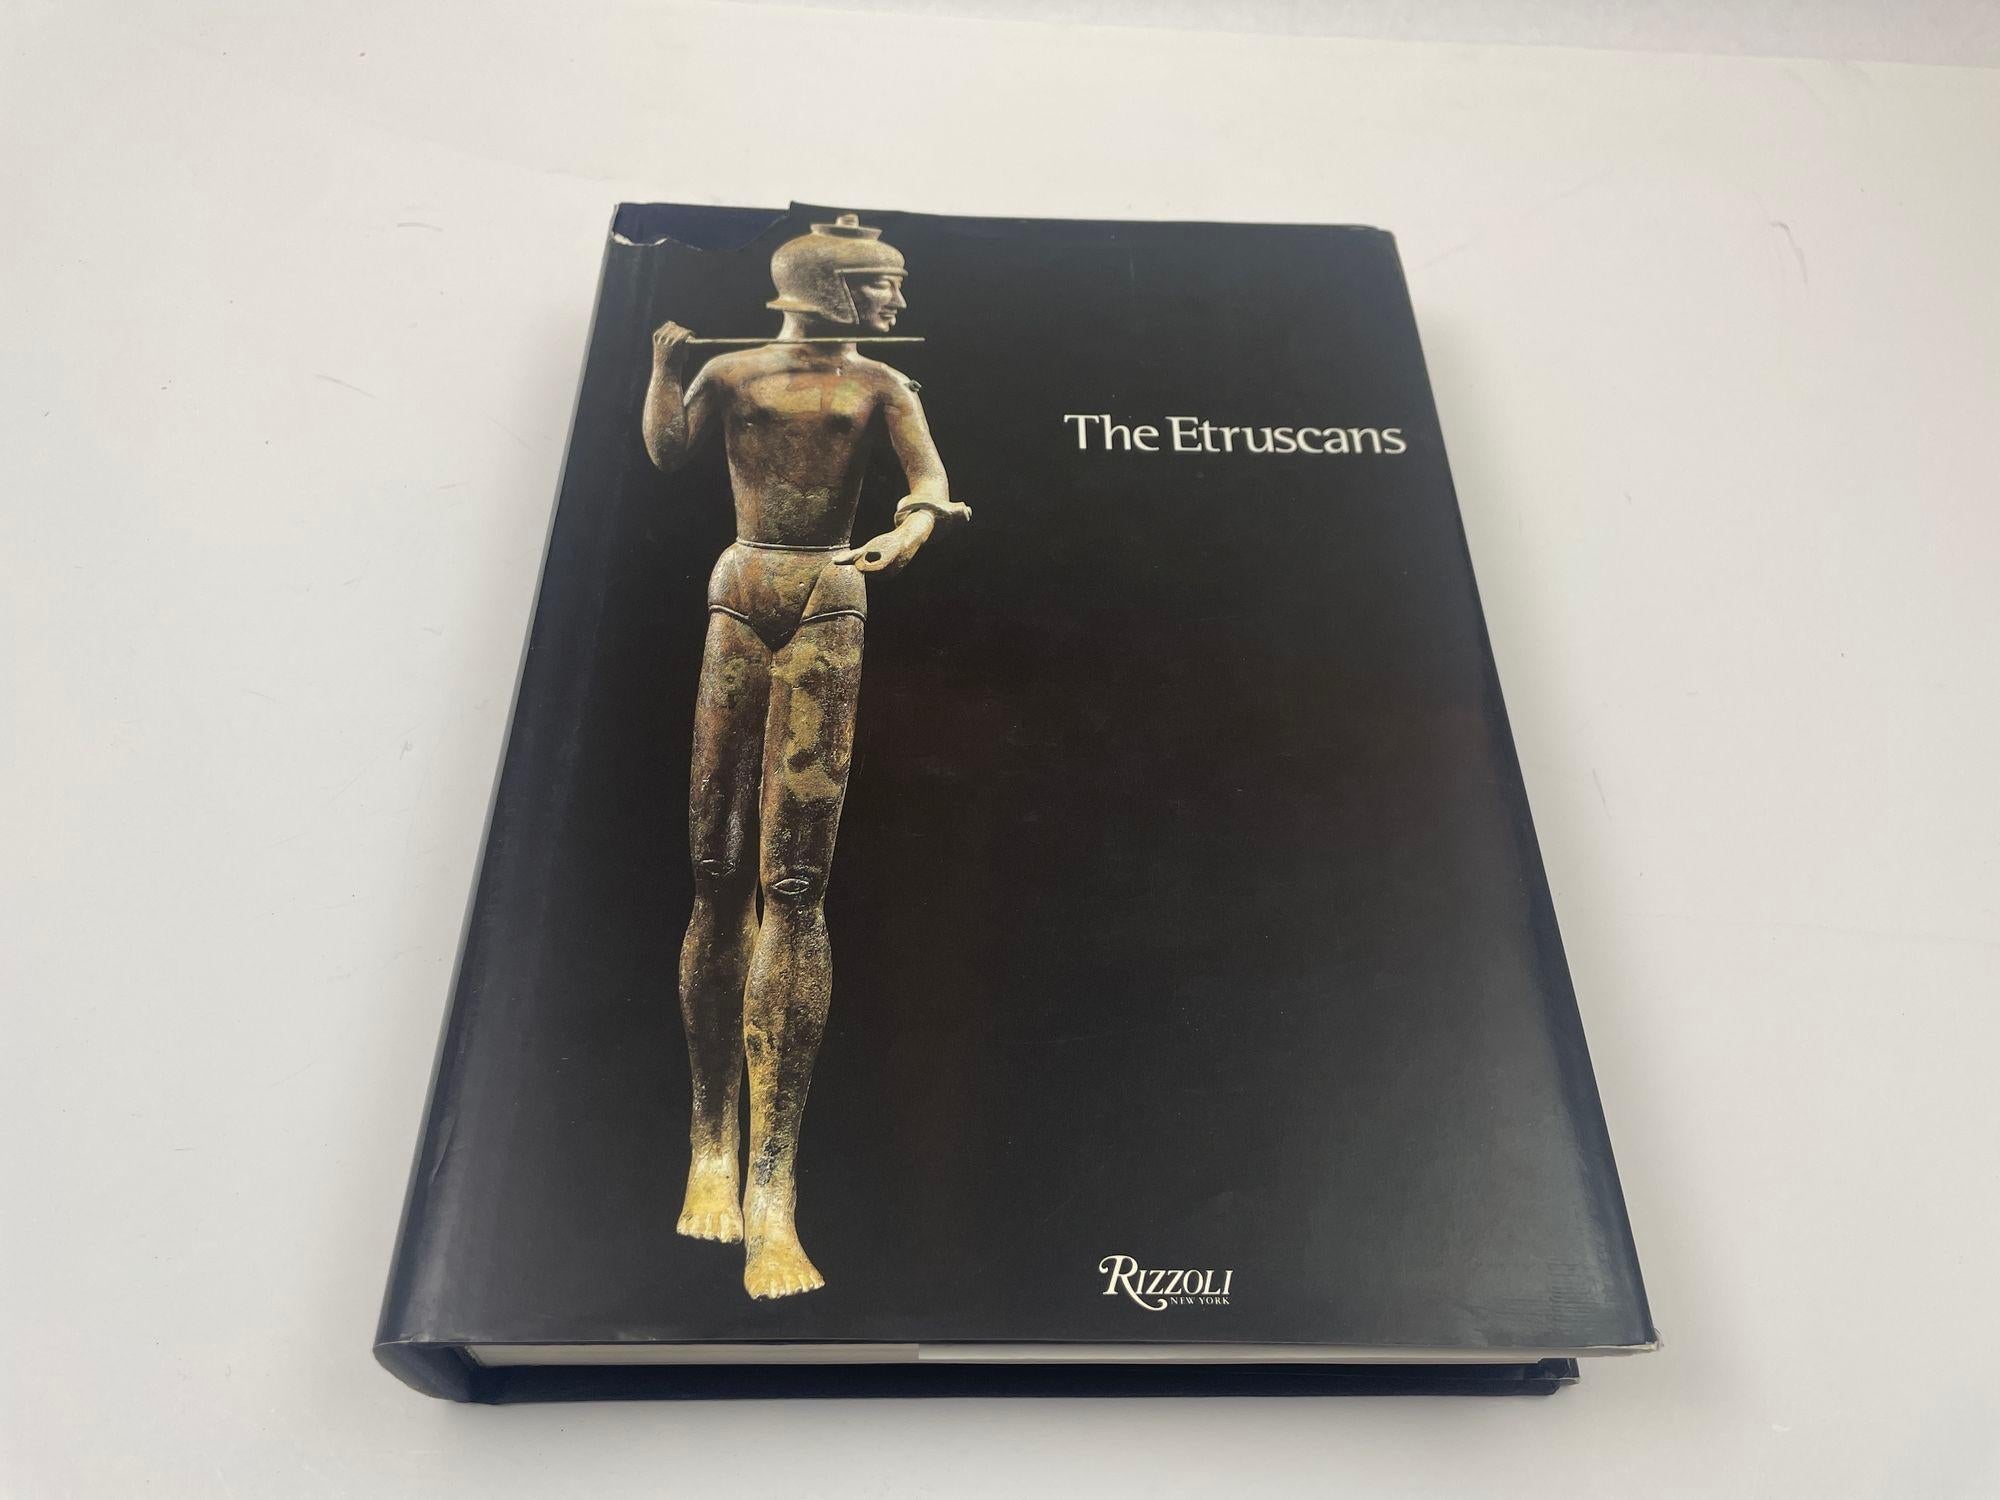 The Etruscans Hardcover First Edition Oversized Collectible Book.May 4, 2001 by Mario Torelli (Author).The Etruscans have long been a rich source of research and intellectual inquiry as the most significant ethnic group who resided in ancient